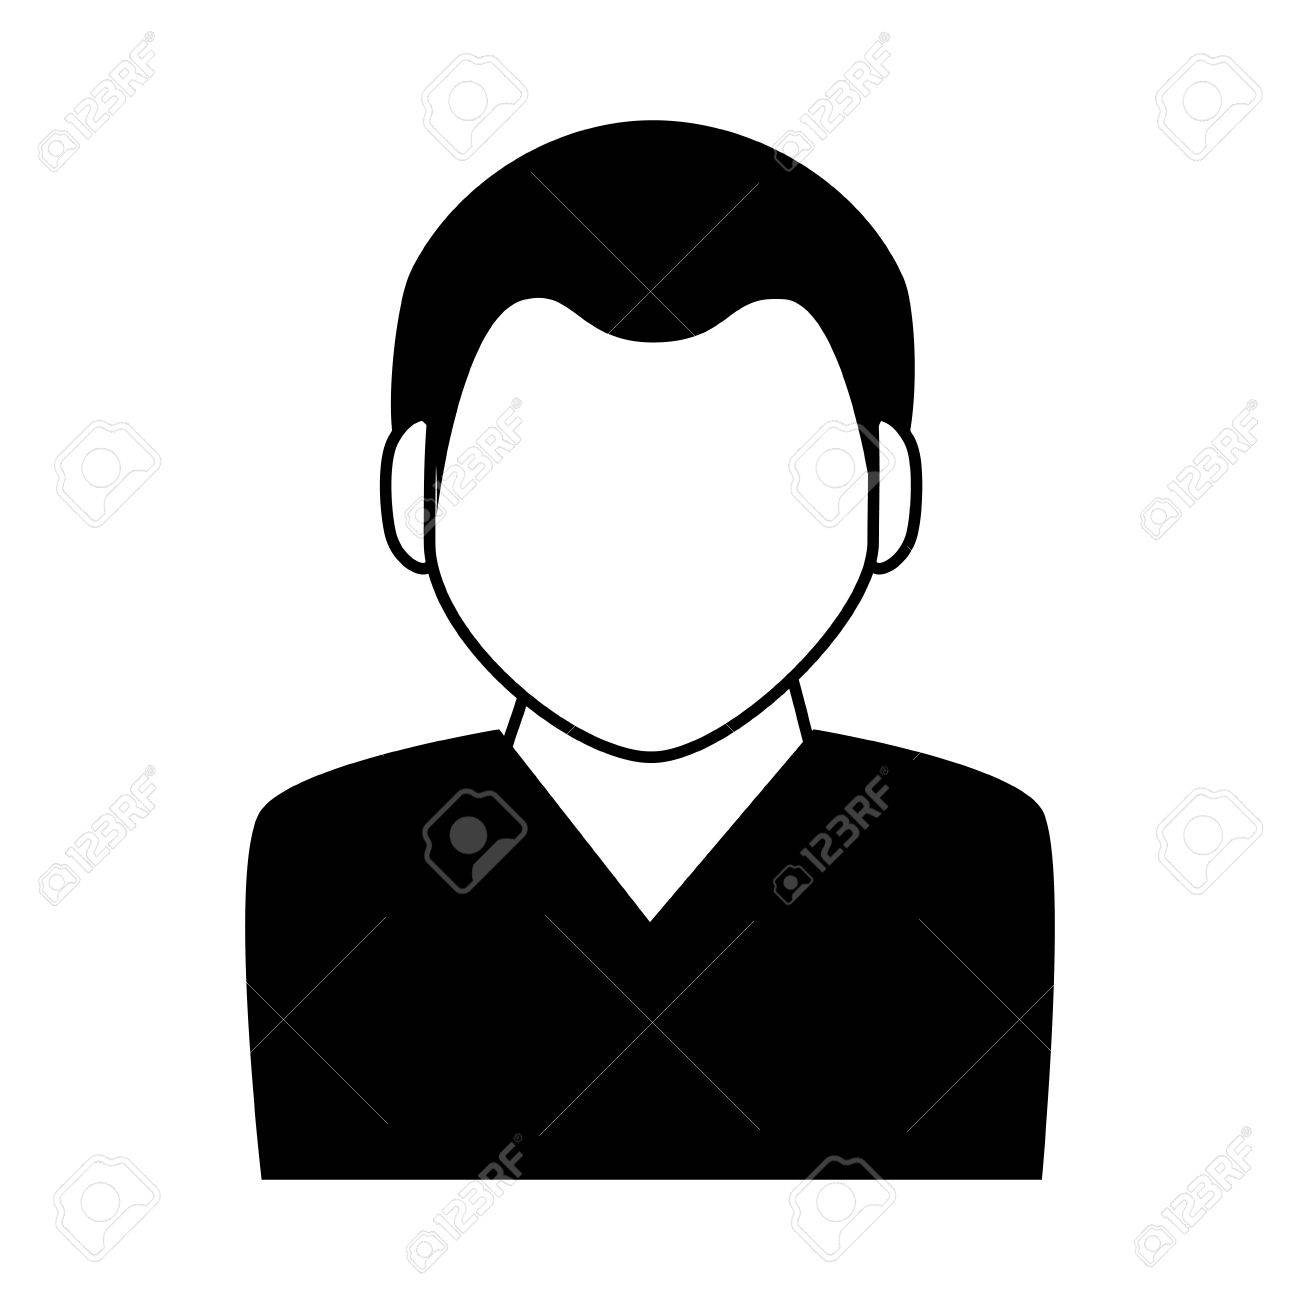 User Icon - Person Profile With Growth Arrow Vector illustration 